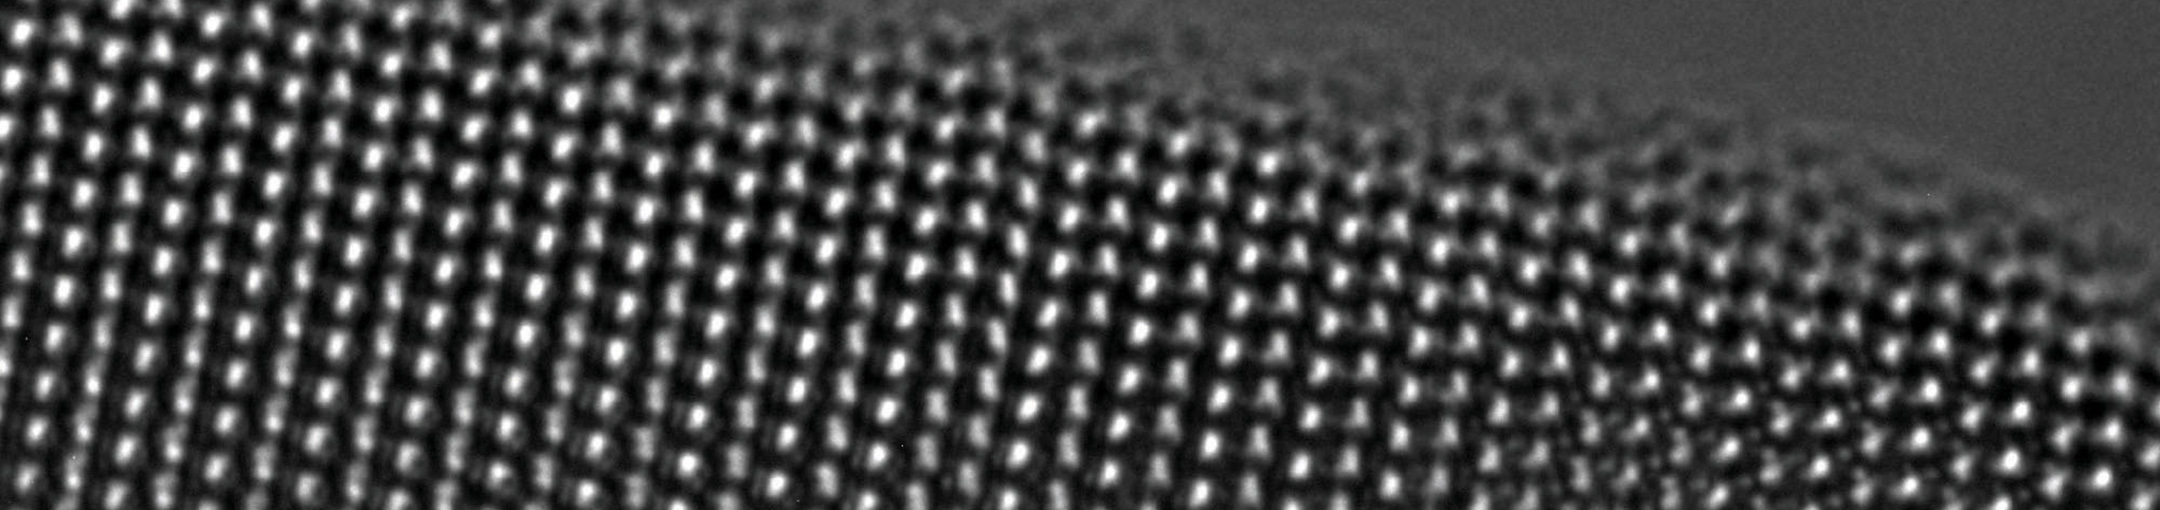 black and white image of a blurry textured surface